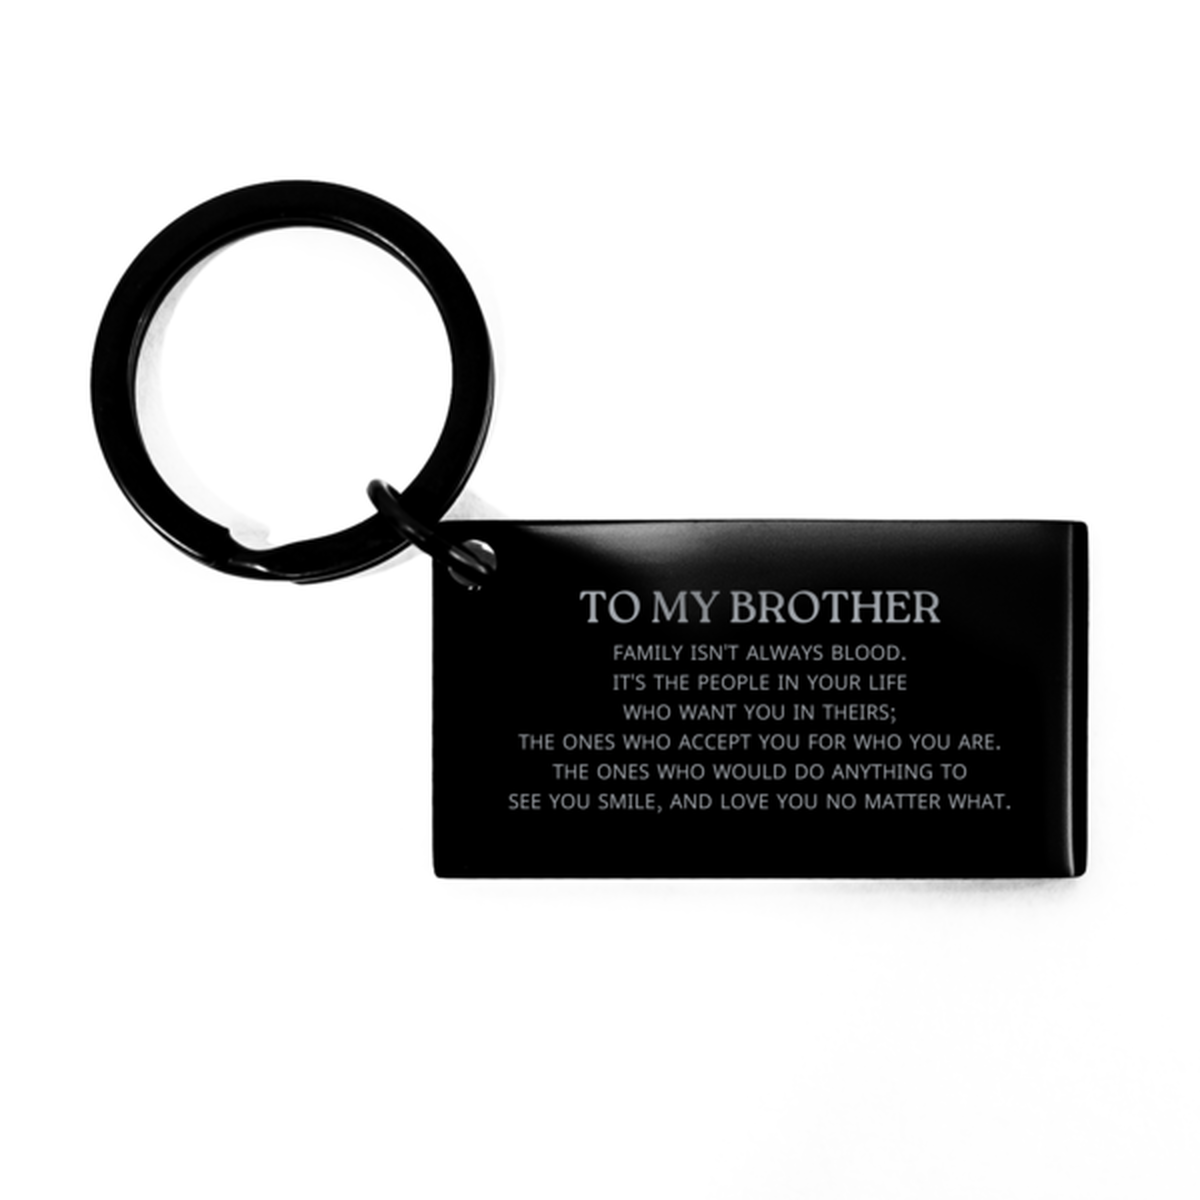 To My Brother Gifts, Family isn't always blood, Brother Keychain, Birthday Christmas Unique Present For Brother